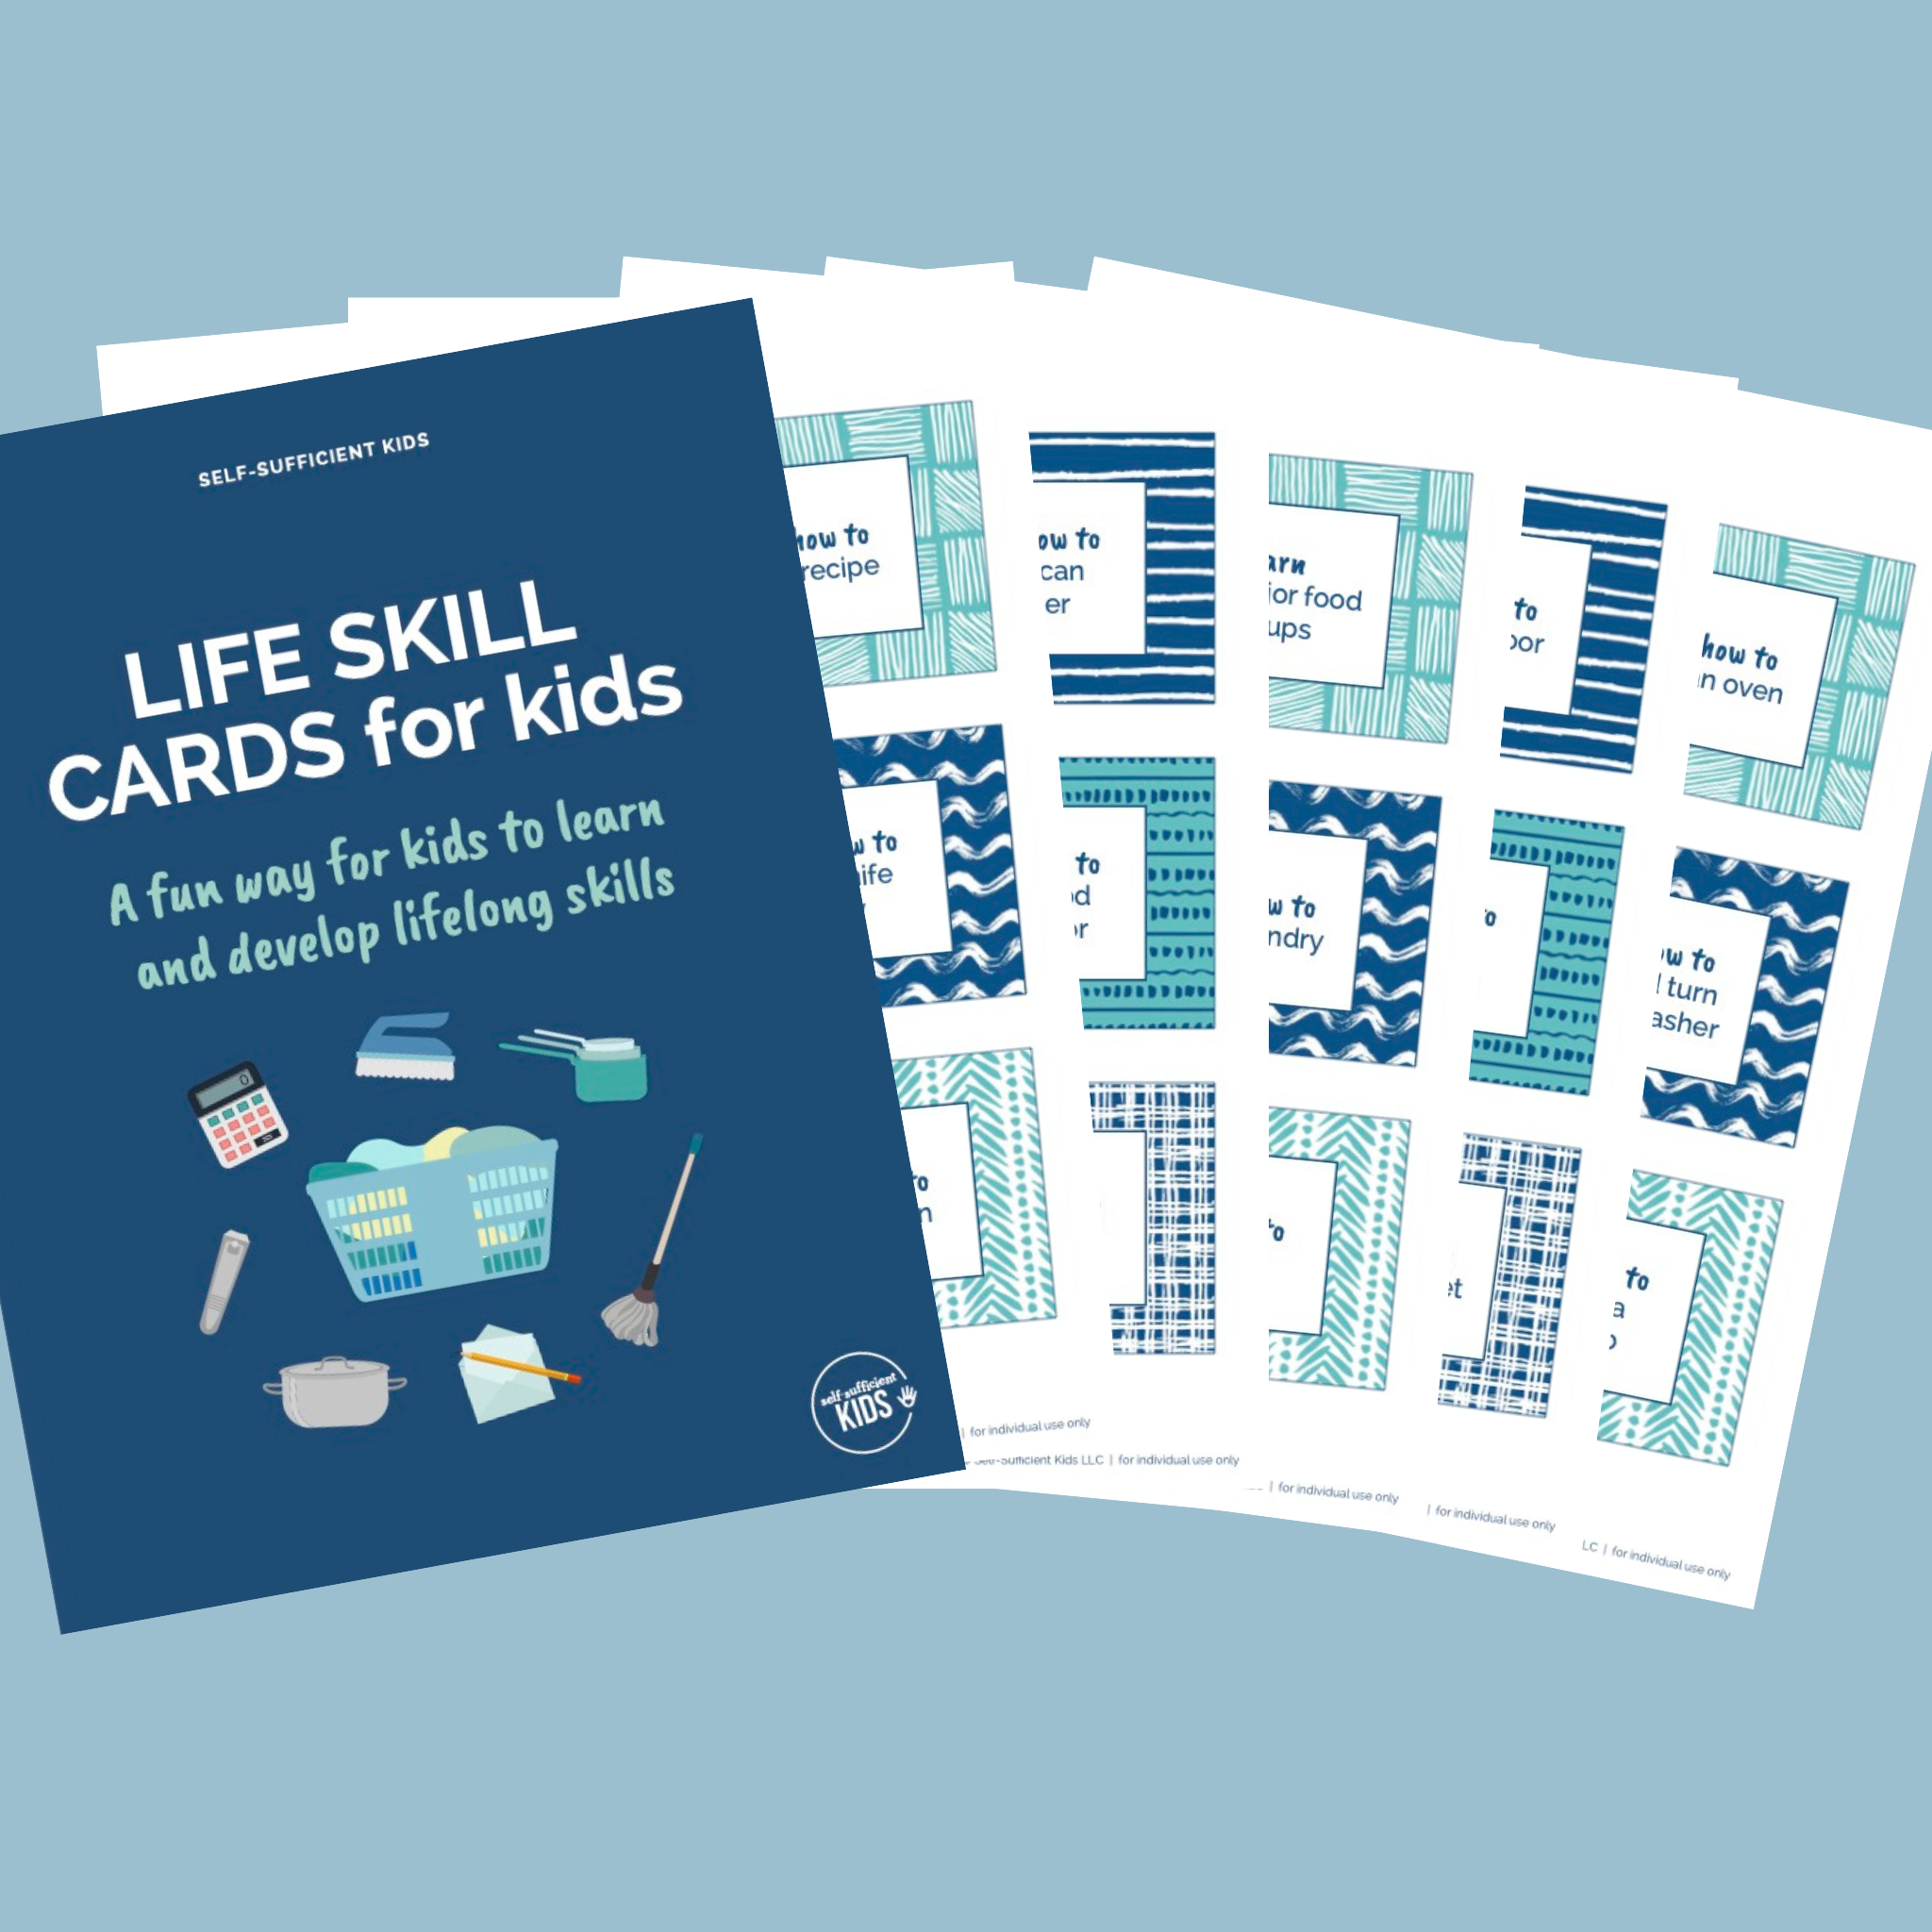 81 Life Skills Cards for Kids